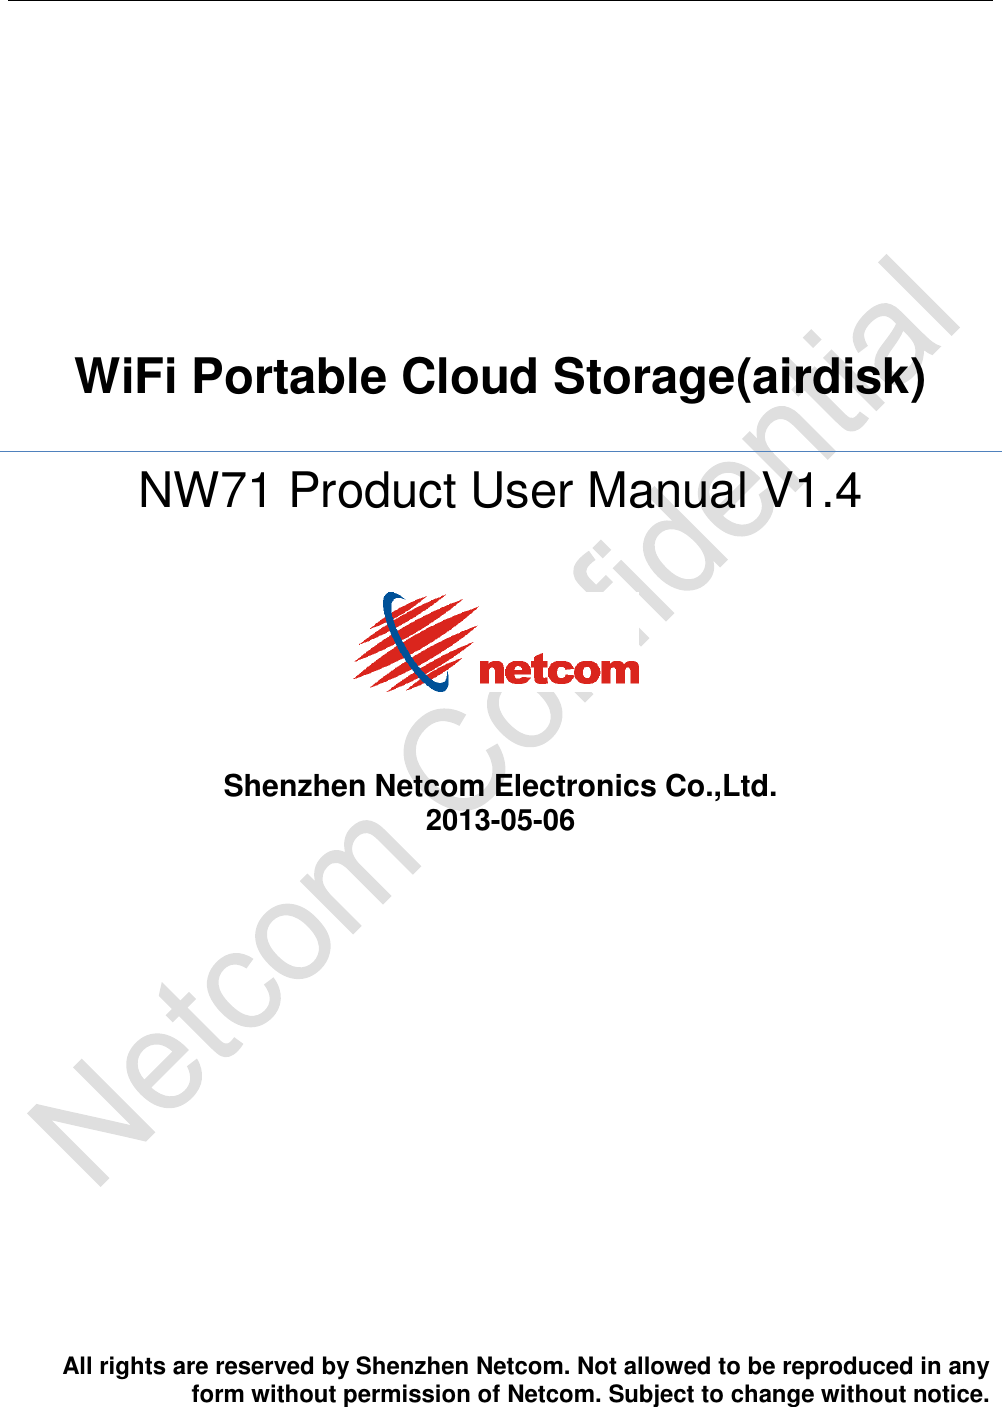    WiFi Portable Cloud Storage(airdisk)  NW71 Product User Manual V1.4    Shenzhen Netcom Electronics Co.,Ltd. 2013-05-06                     All rights are reserved by Shenzhen Netcom. Not allowed to be reproduced in any form without permission of Netcom. Subject to change without notice.   